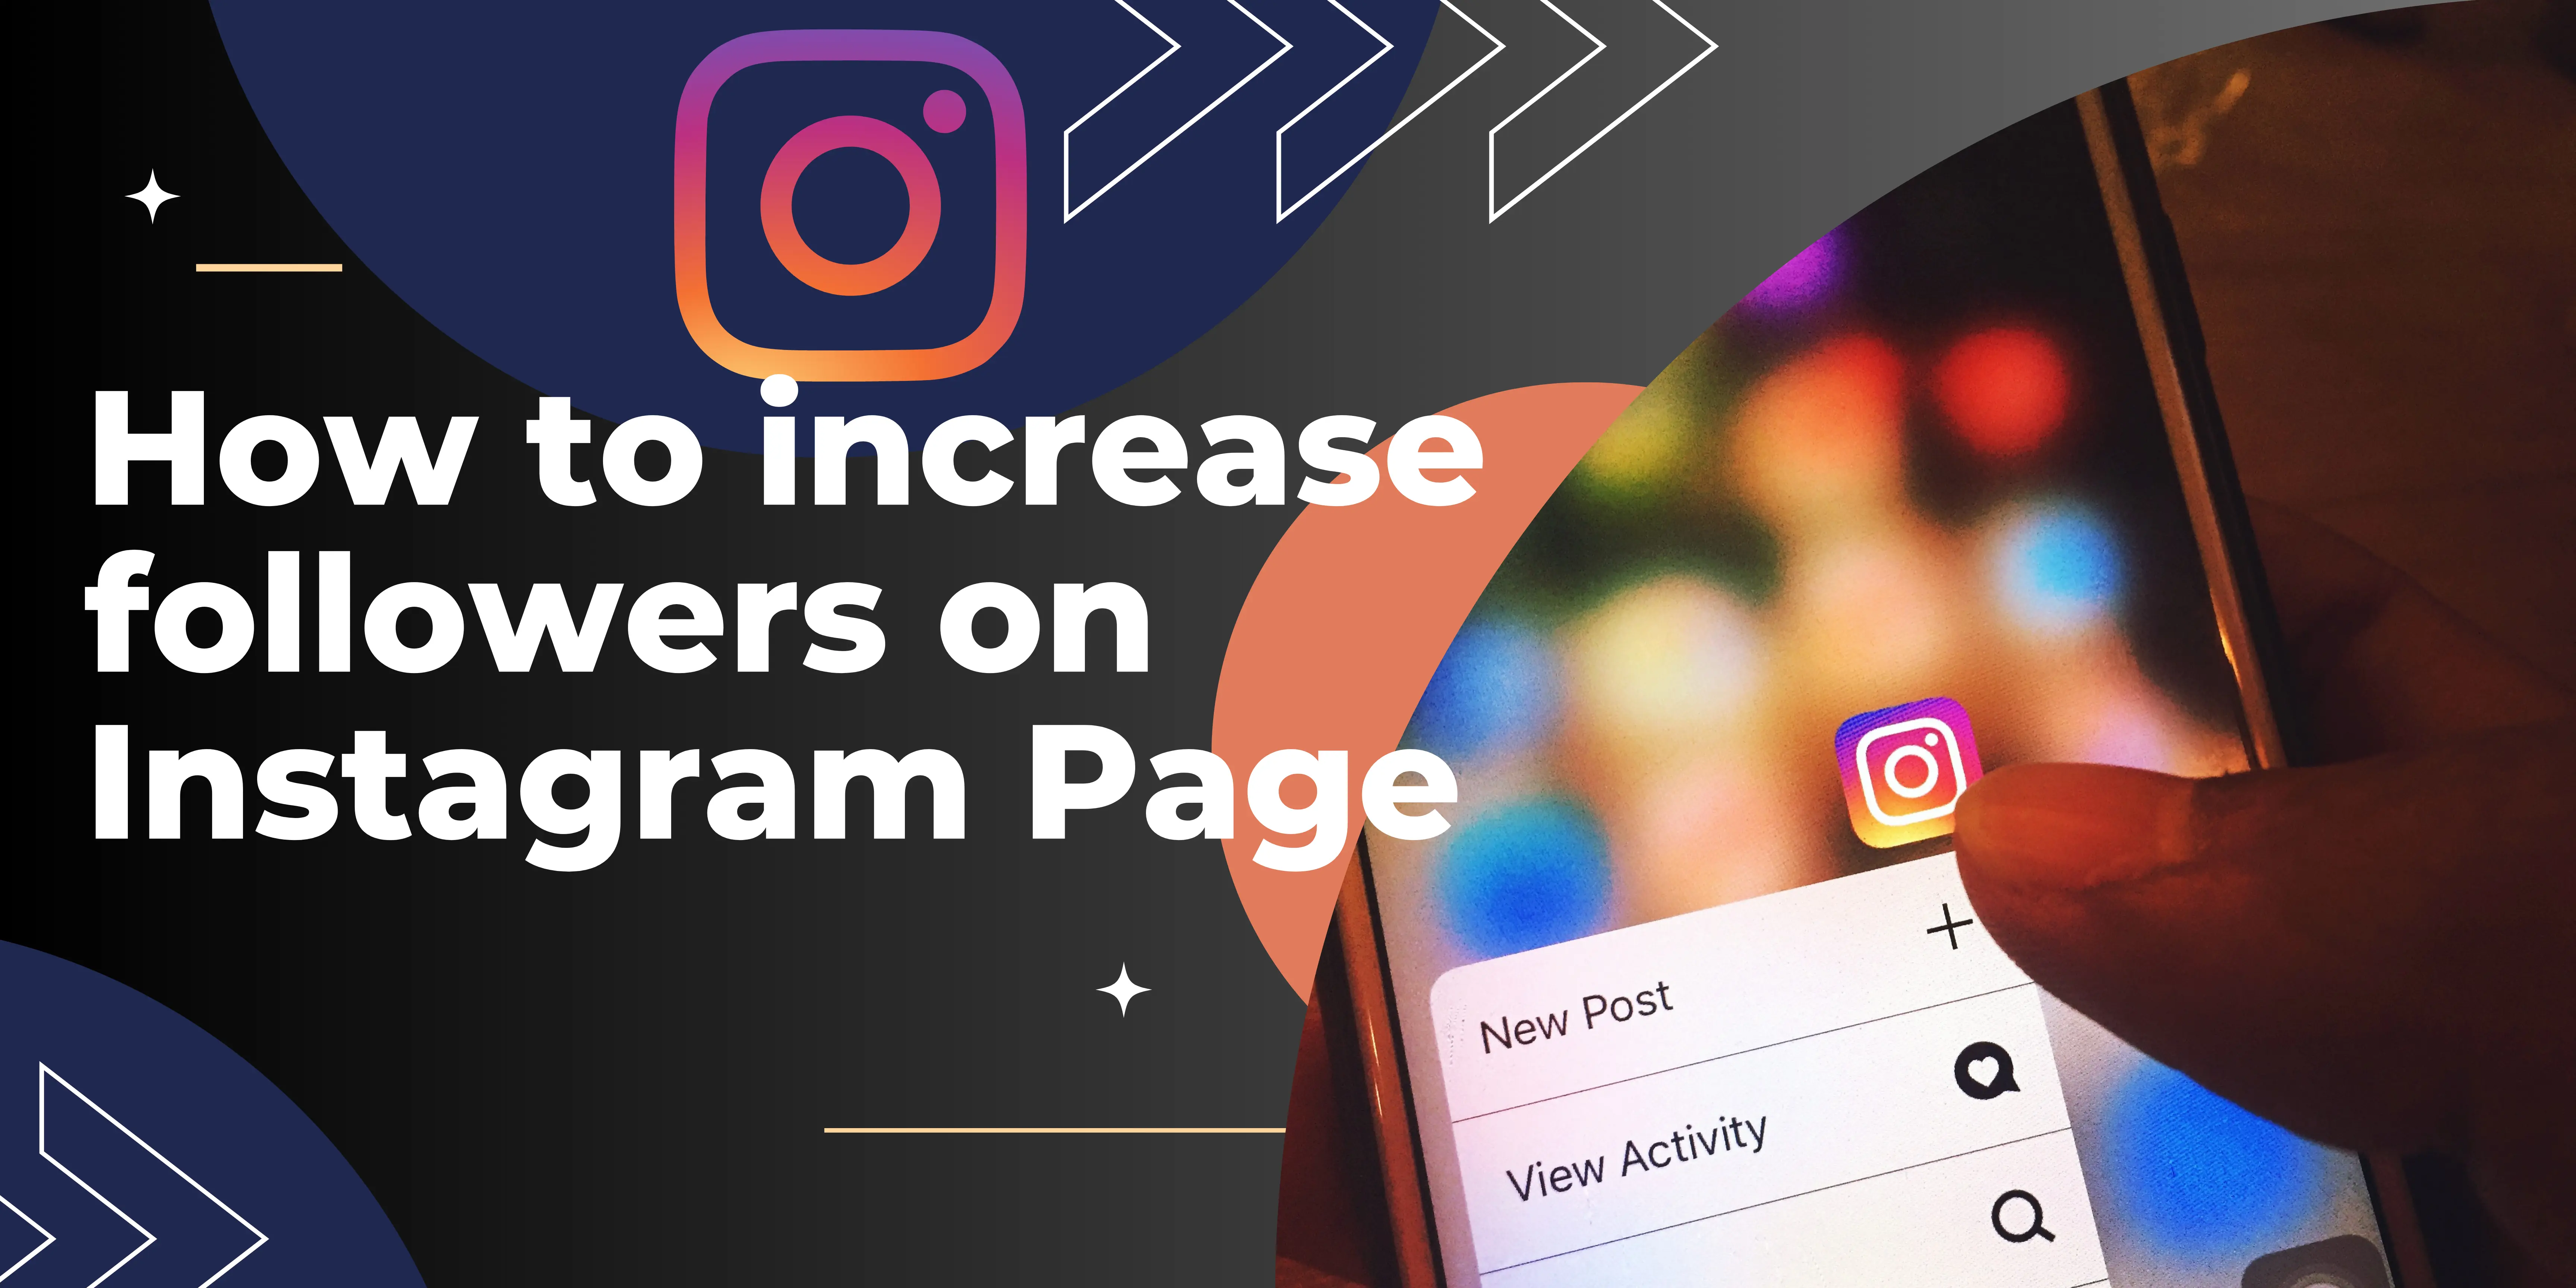 How to increase followers on Instagram Page